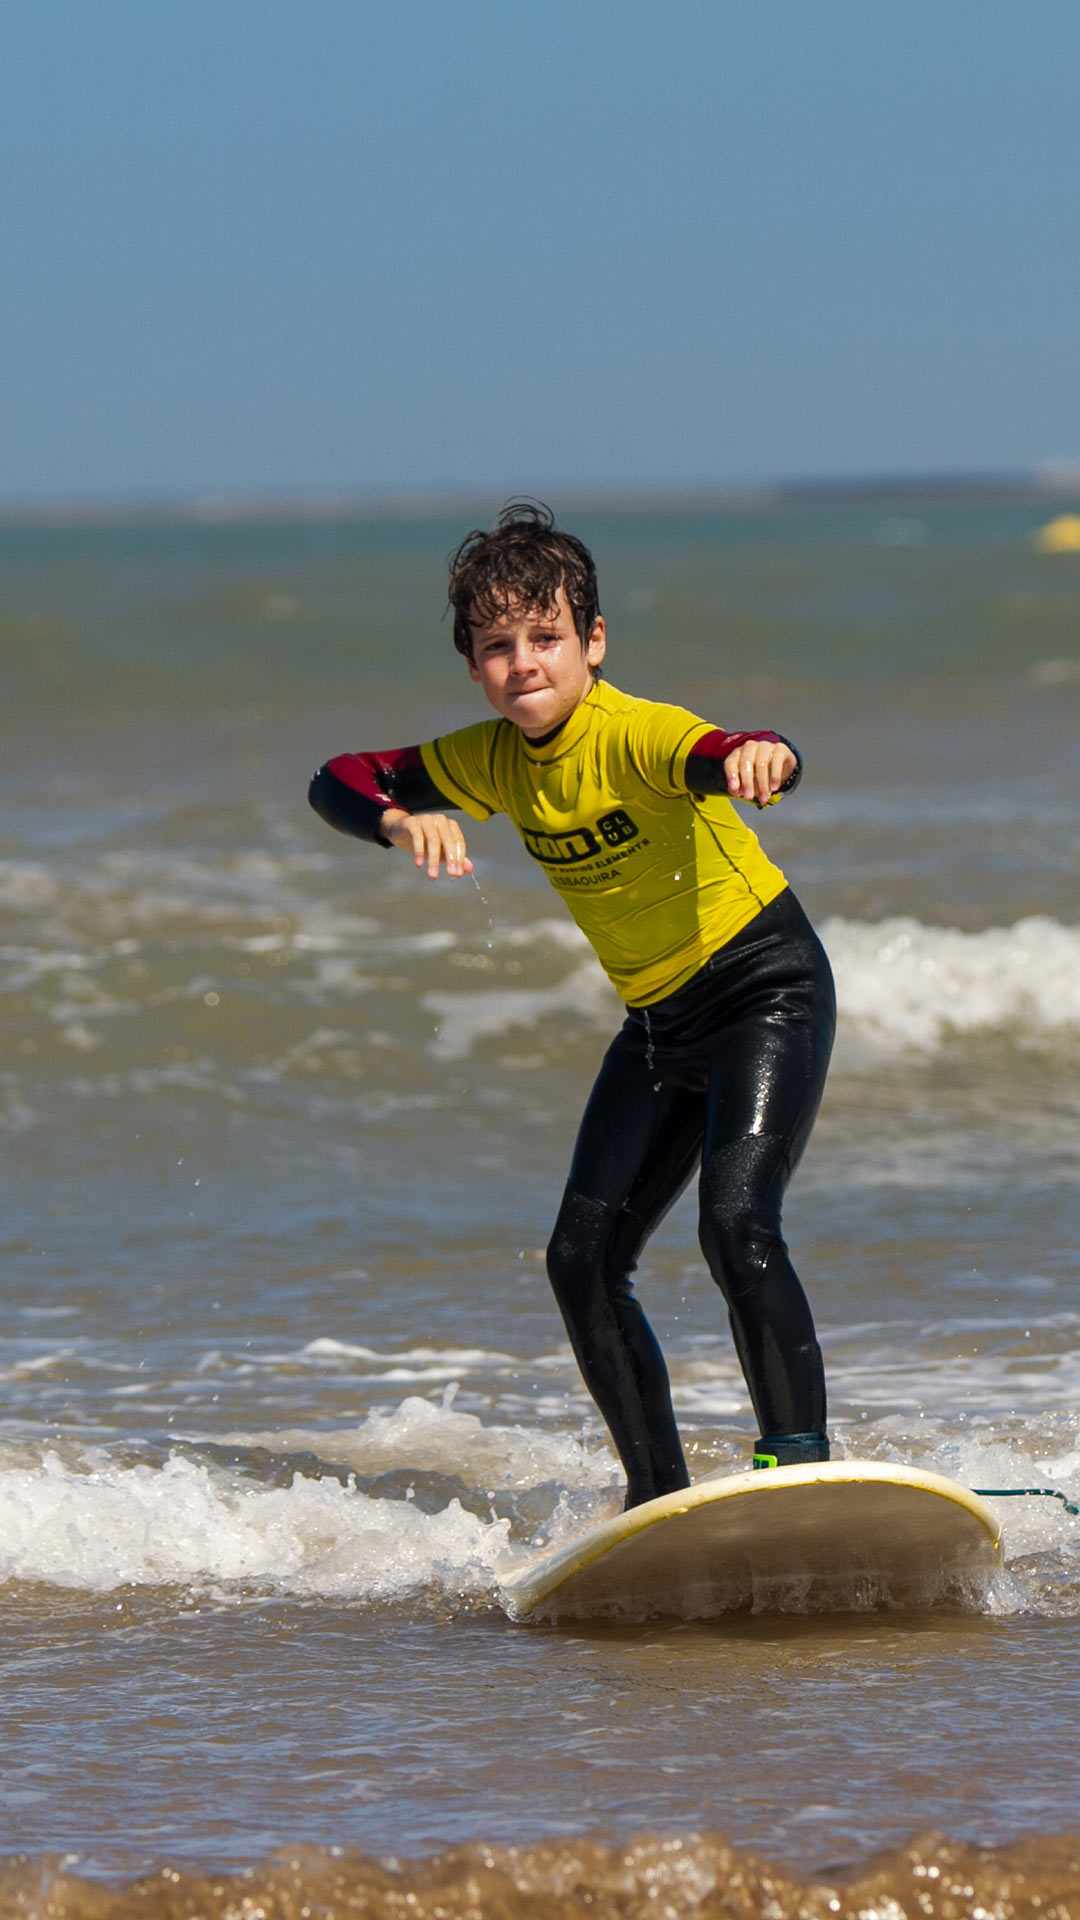 A child surfing his first waves in one of his course with a proud look on his face.